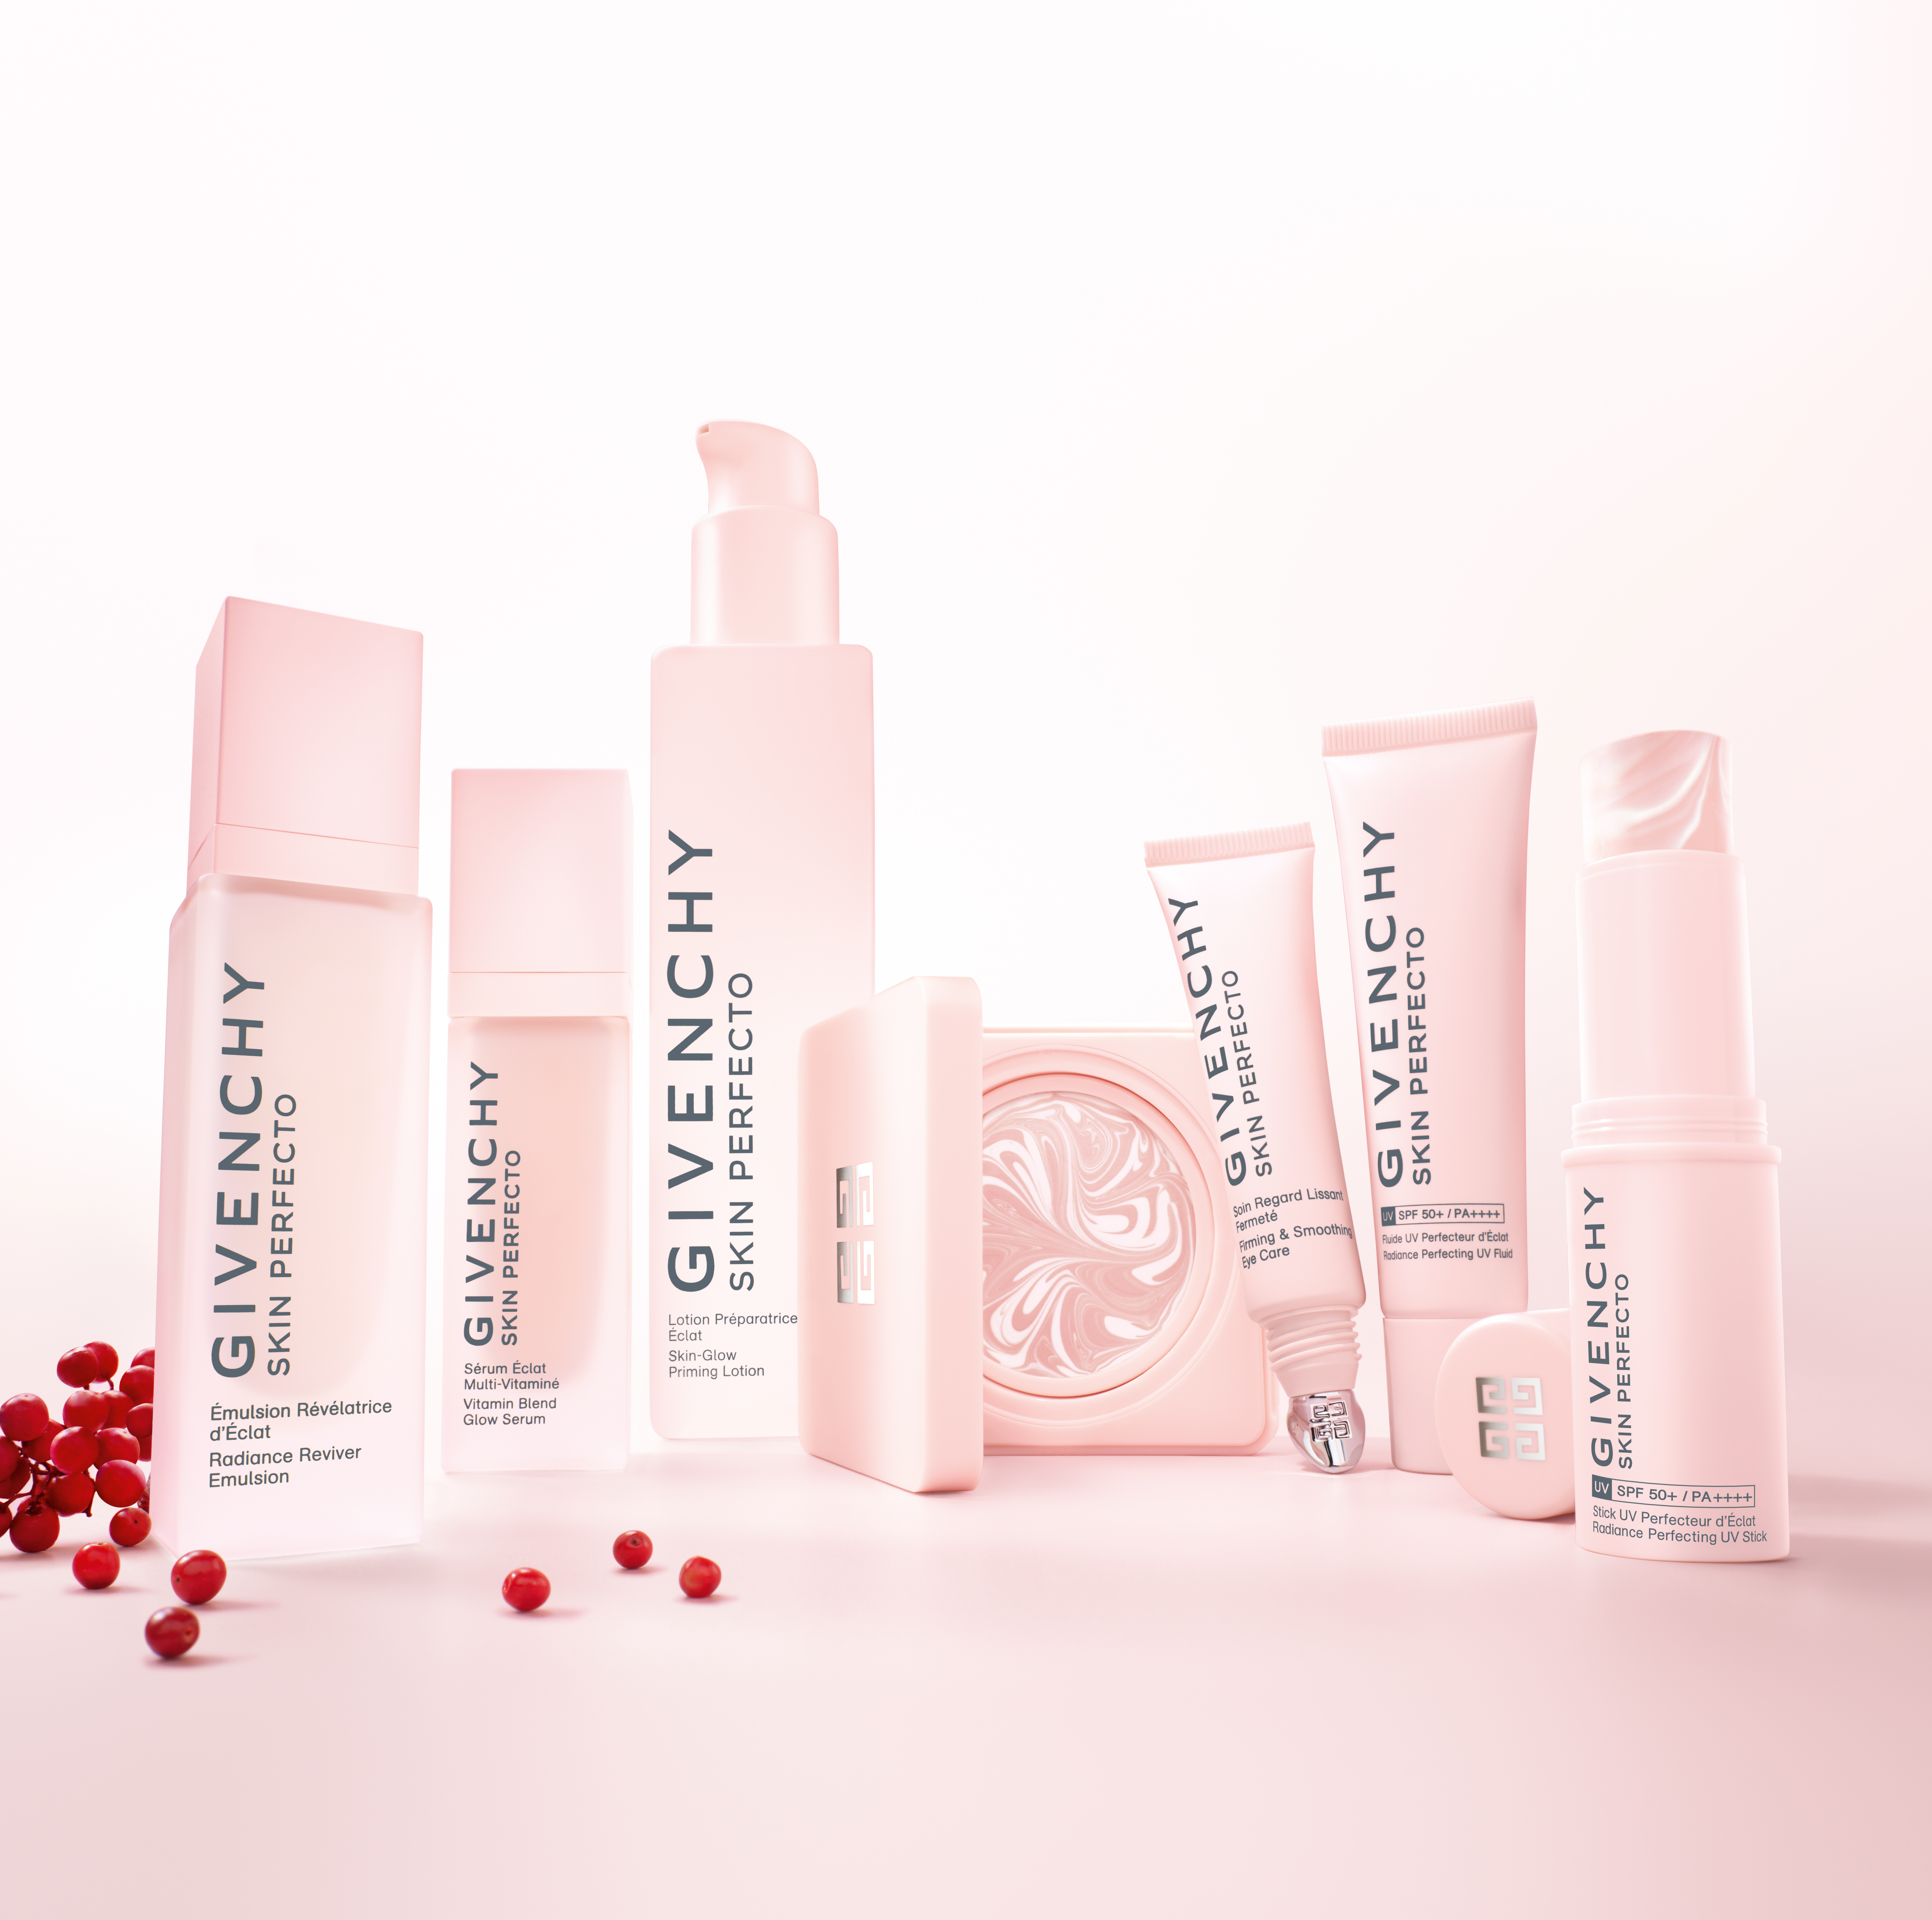 Skin Perfecto products